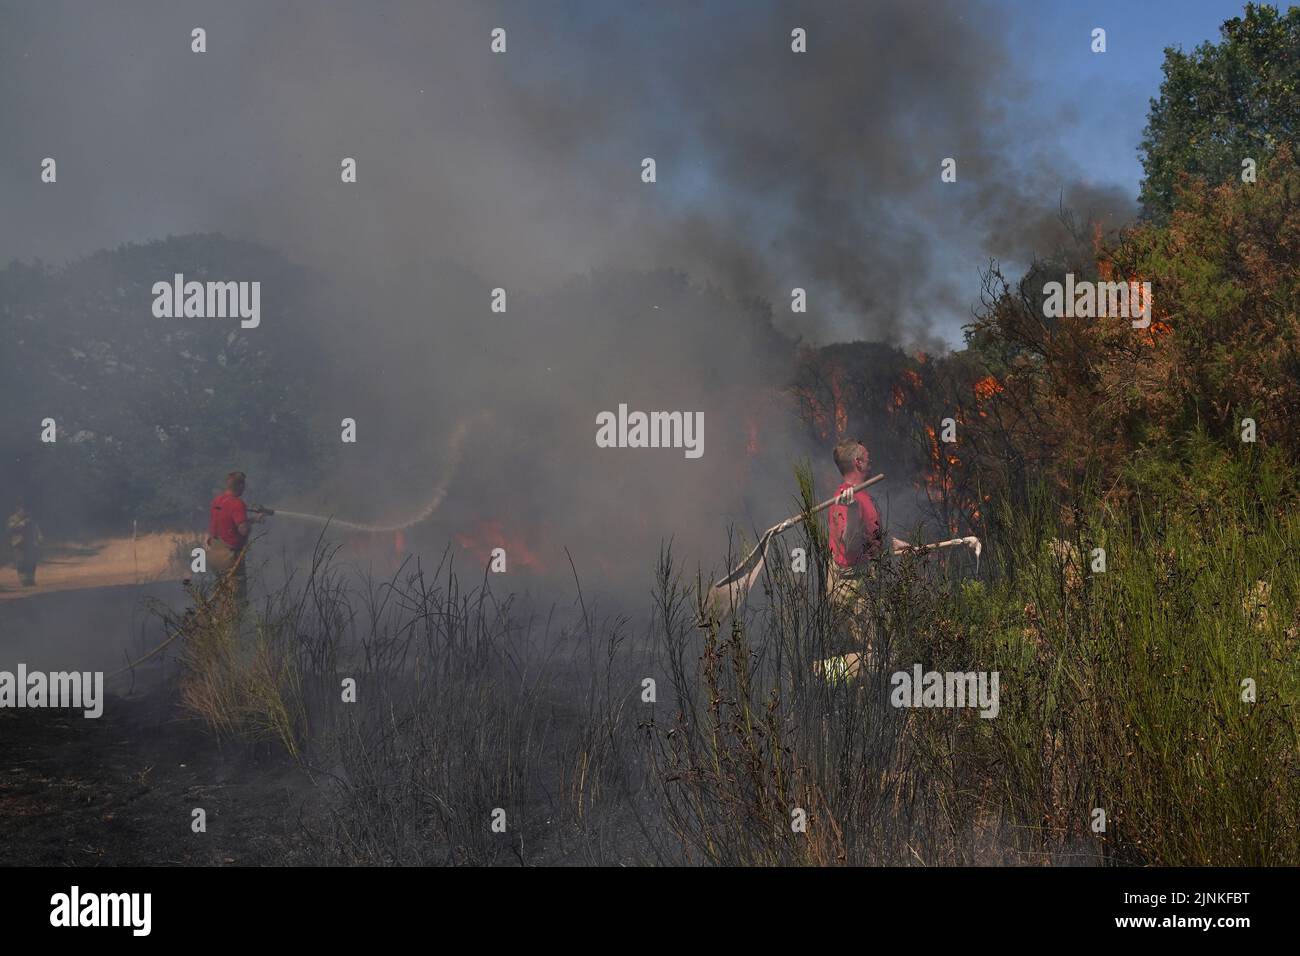 Firefighters battling a grass fire on Leyton flats in east London, as a drought has been declared for parts of England following the driest summer for 50 years. Stock Photo